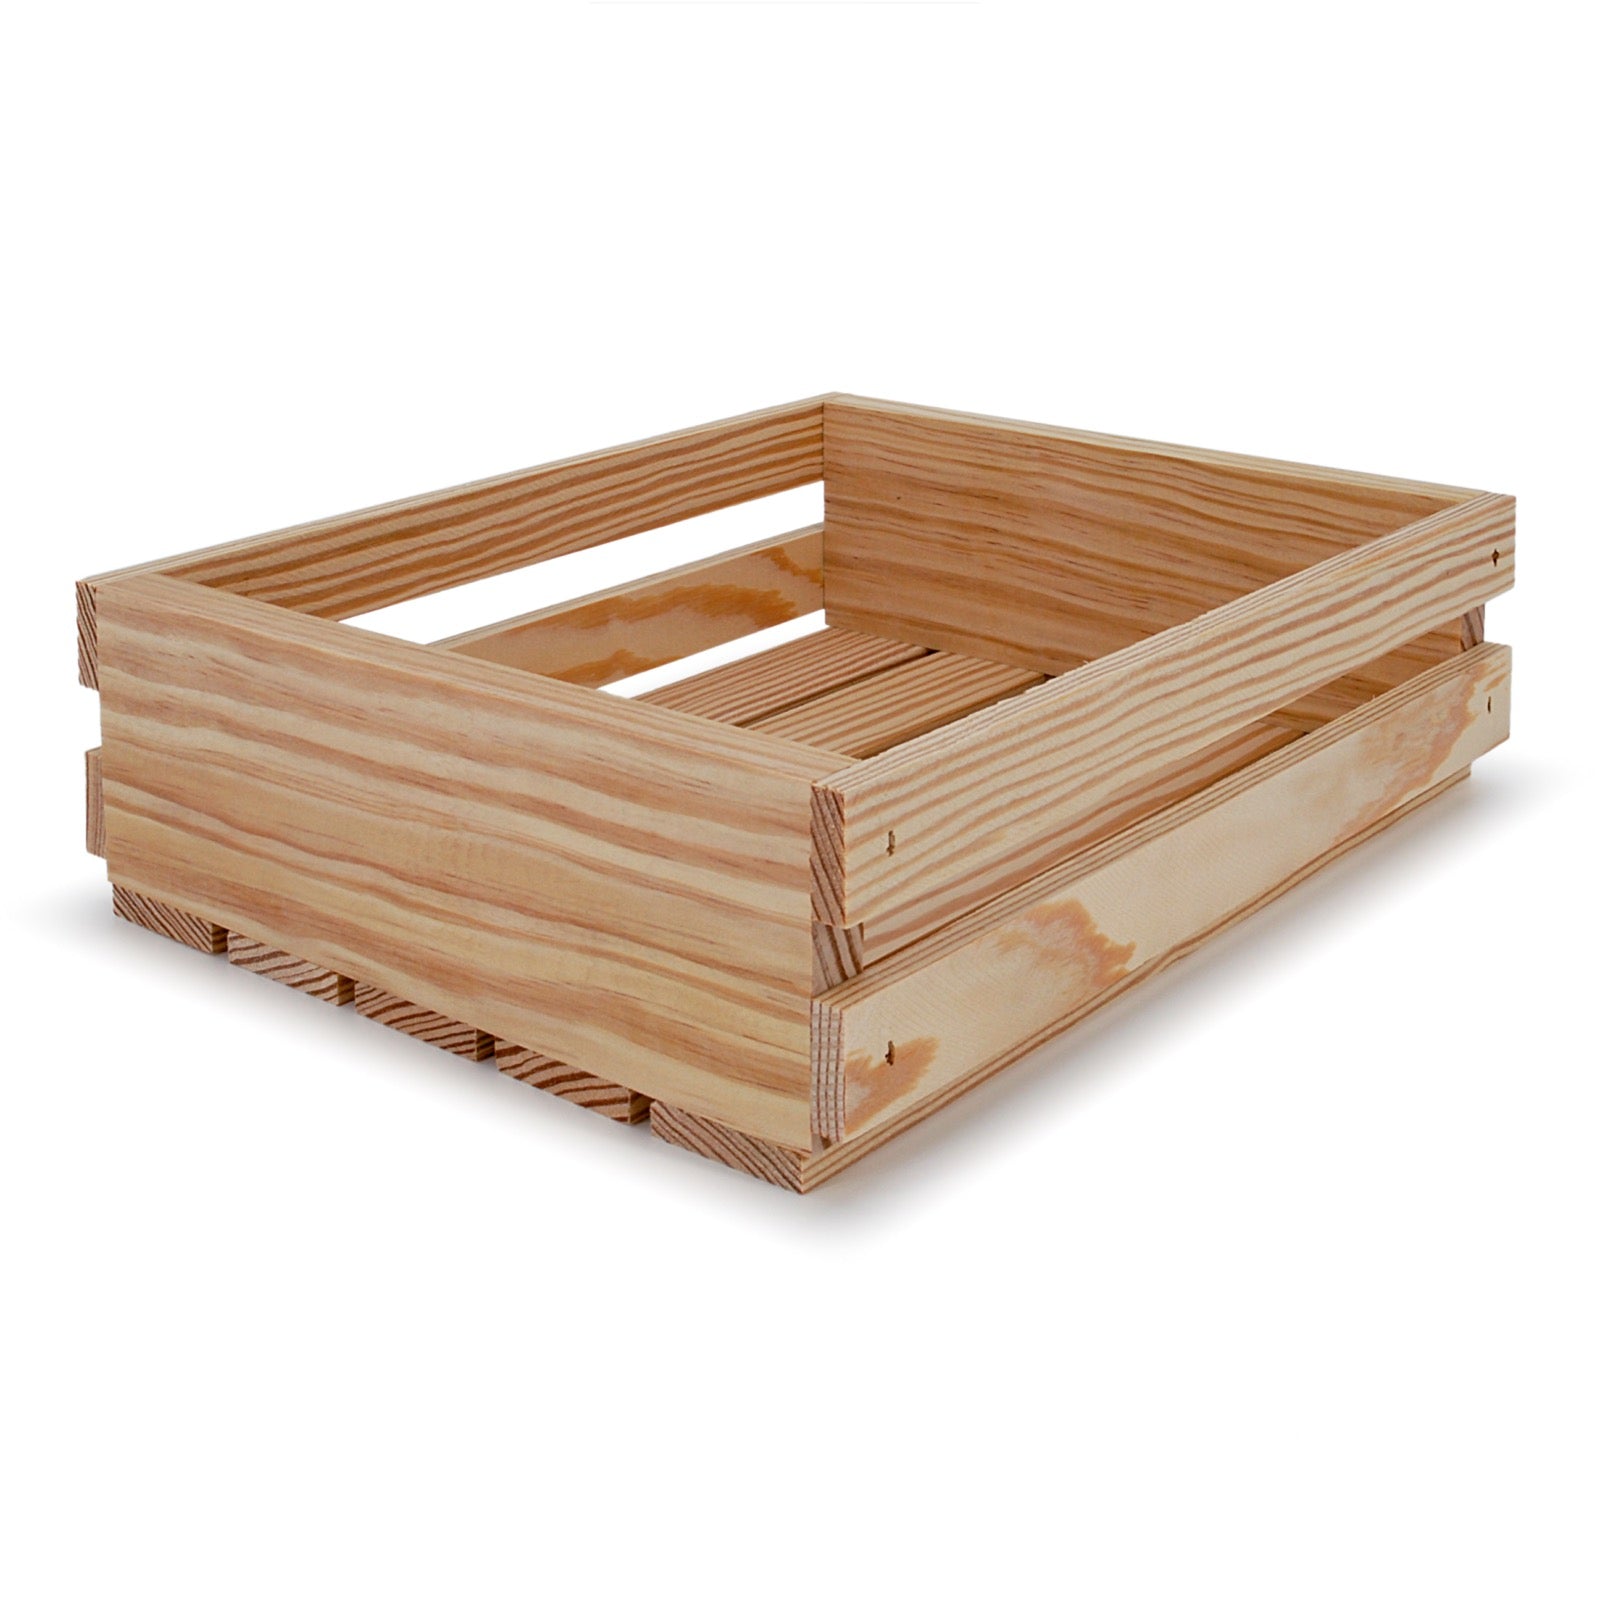 Small wooden crates 12x10x3.5, 6-SS-12-10-3.5-NX-NW-NL, 12-SS-12-10-3.5-NX-NW-NL, 24-SS-12-10-3.5-NX-NW-NL, 48-SS-12-10-3.5-NX-NW-NL, 96-SS-12-10-3.5-NX-NW-NL